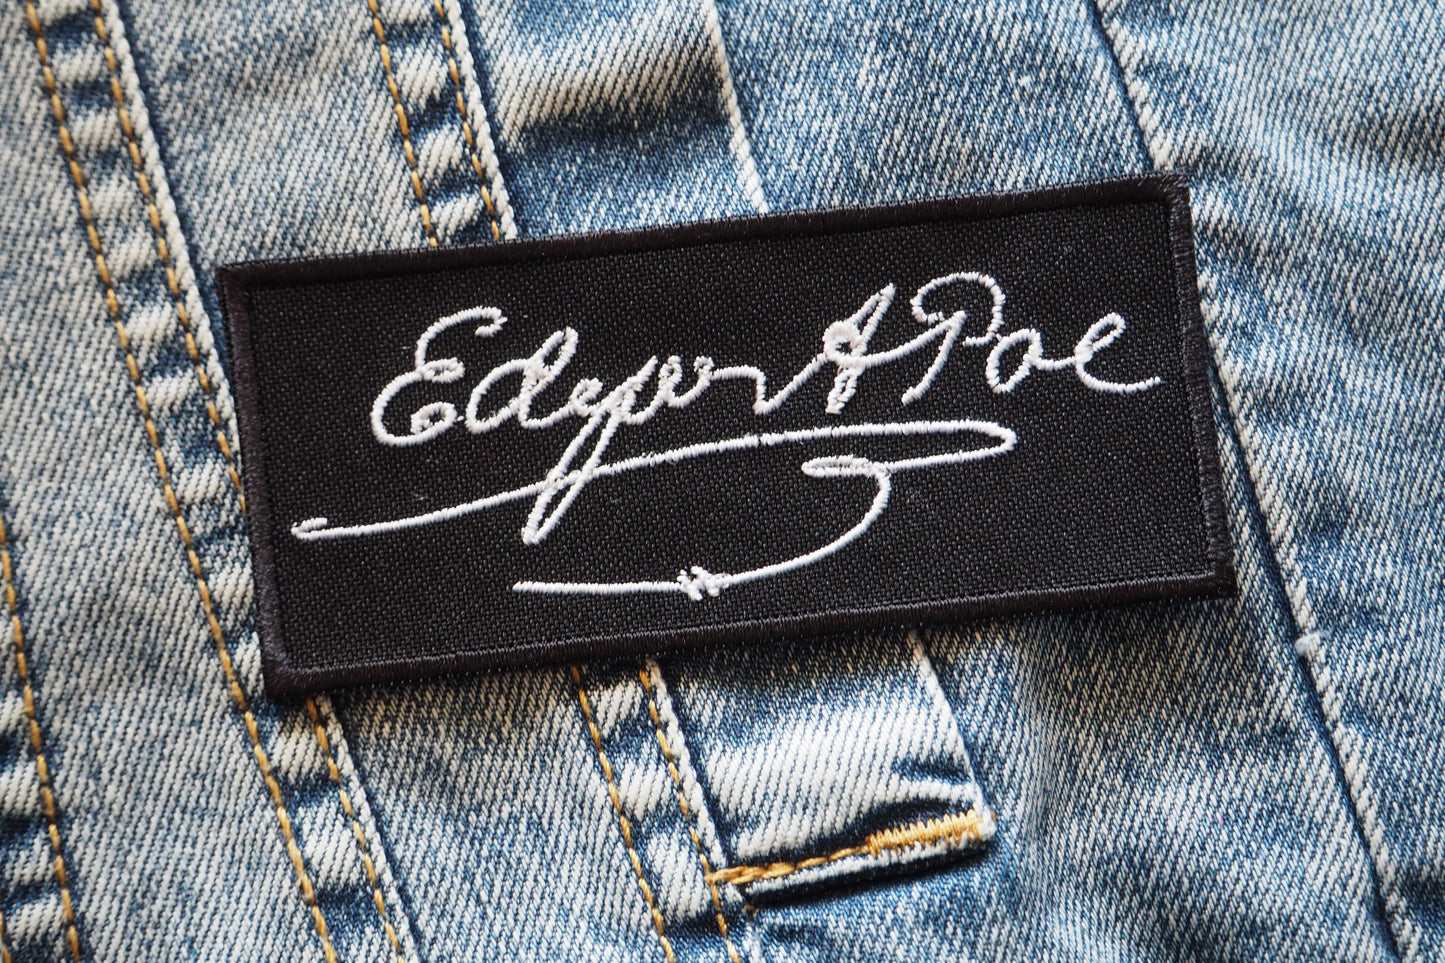 Edgar Allan Poe Signature Embroidered Patch